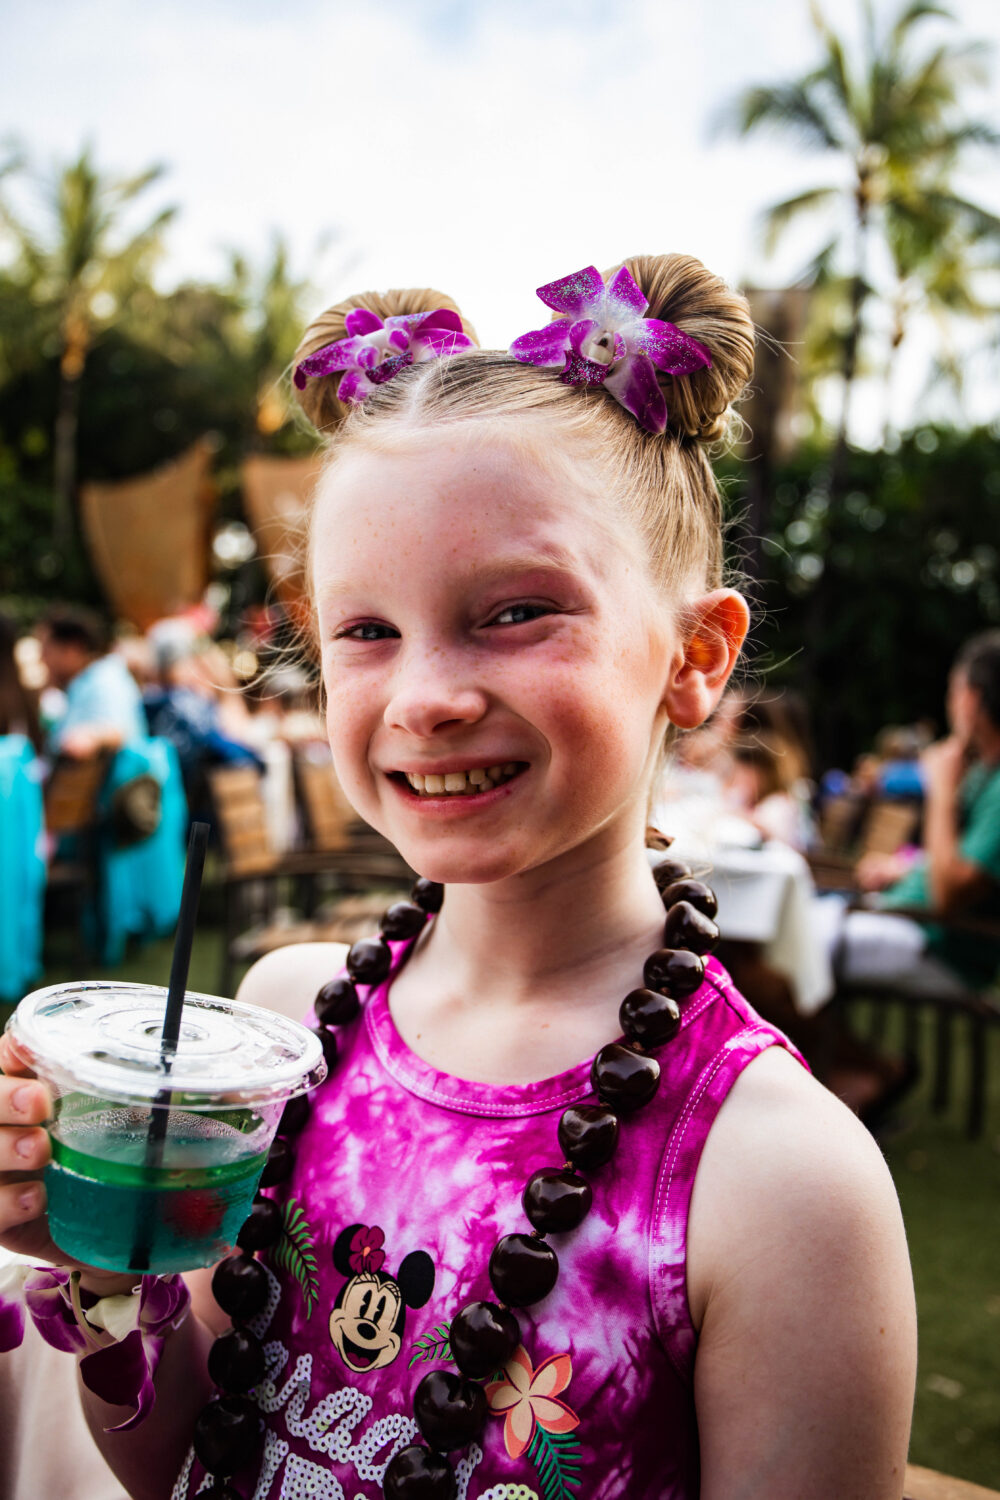 a full guide to the aulani luau : is it worth the price?